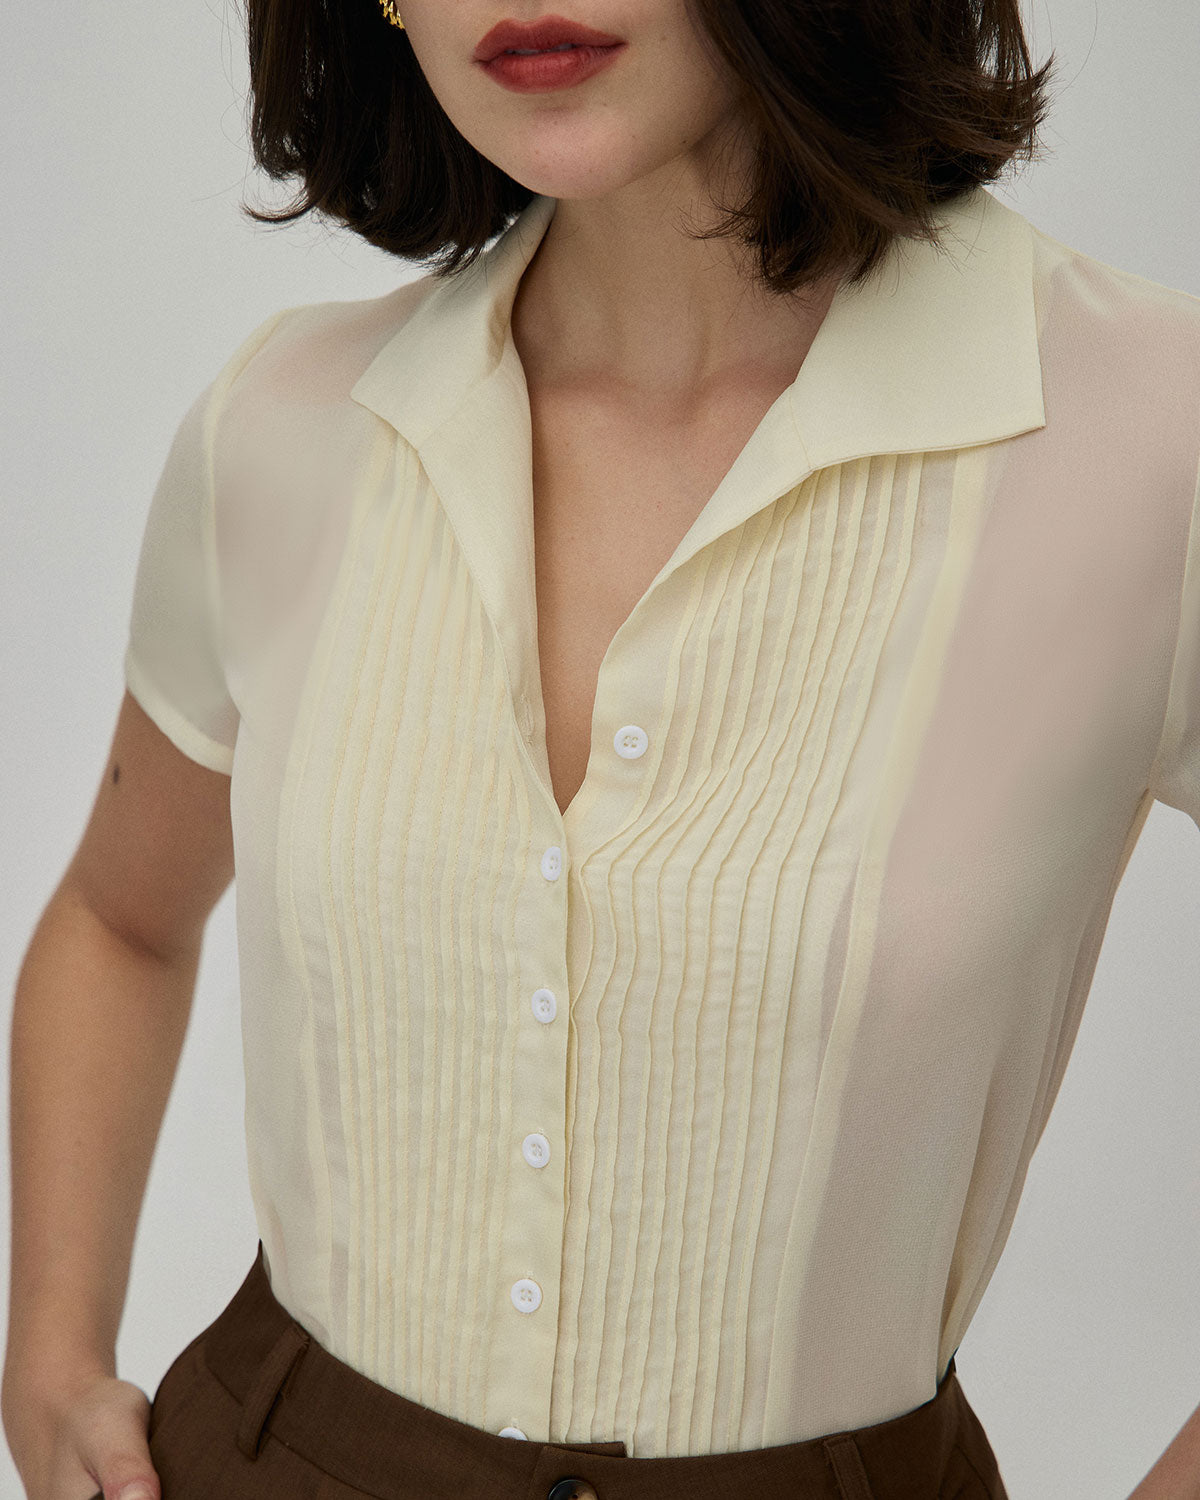 The Beige V Neck Pleated Chiffon Blouse & Reviews - Beige - Tops | RIHOAS